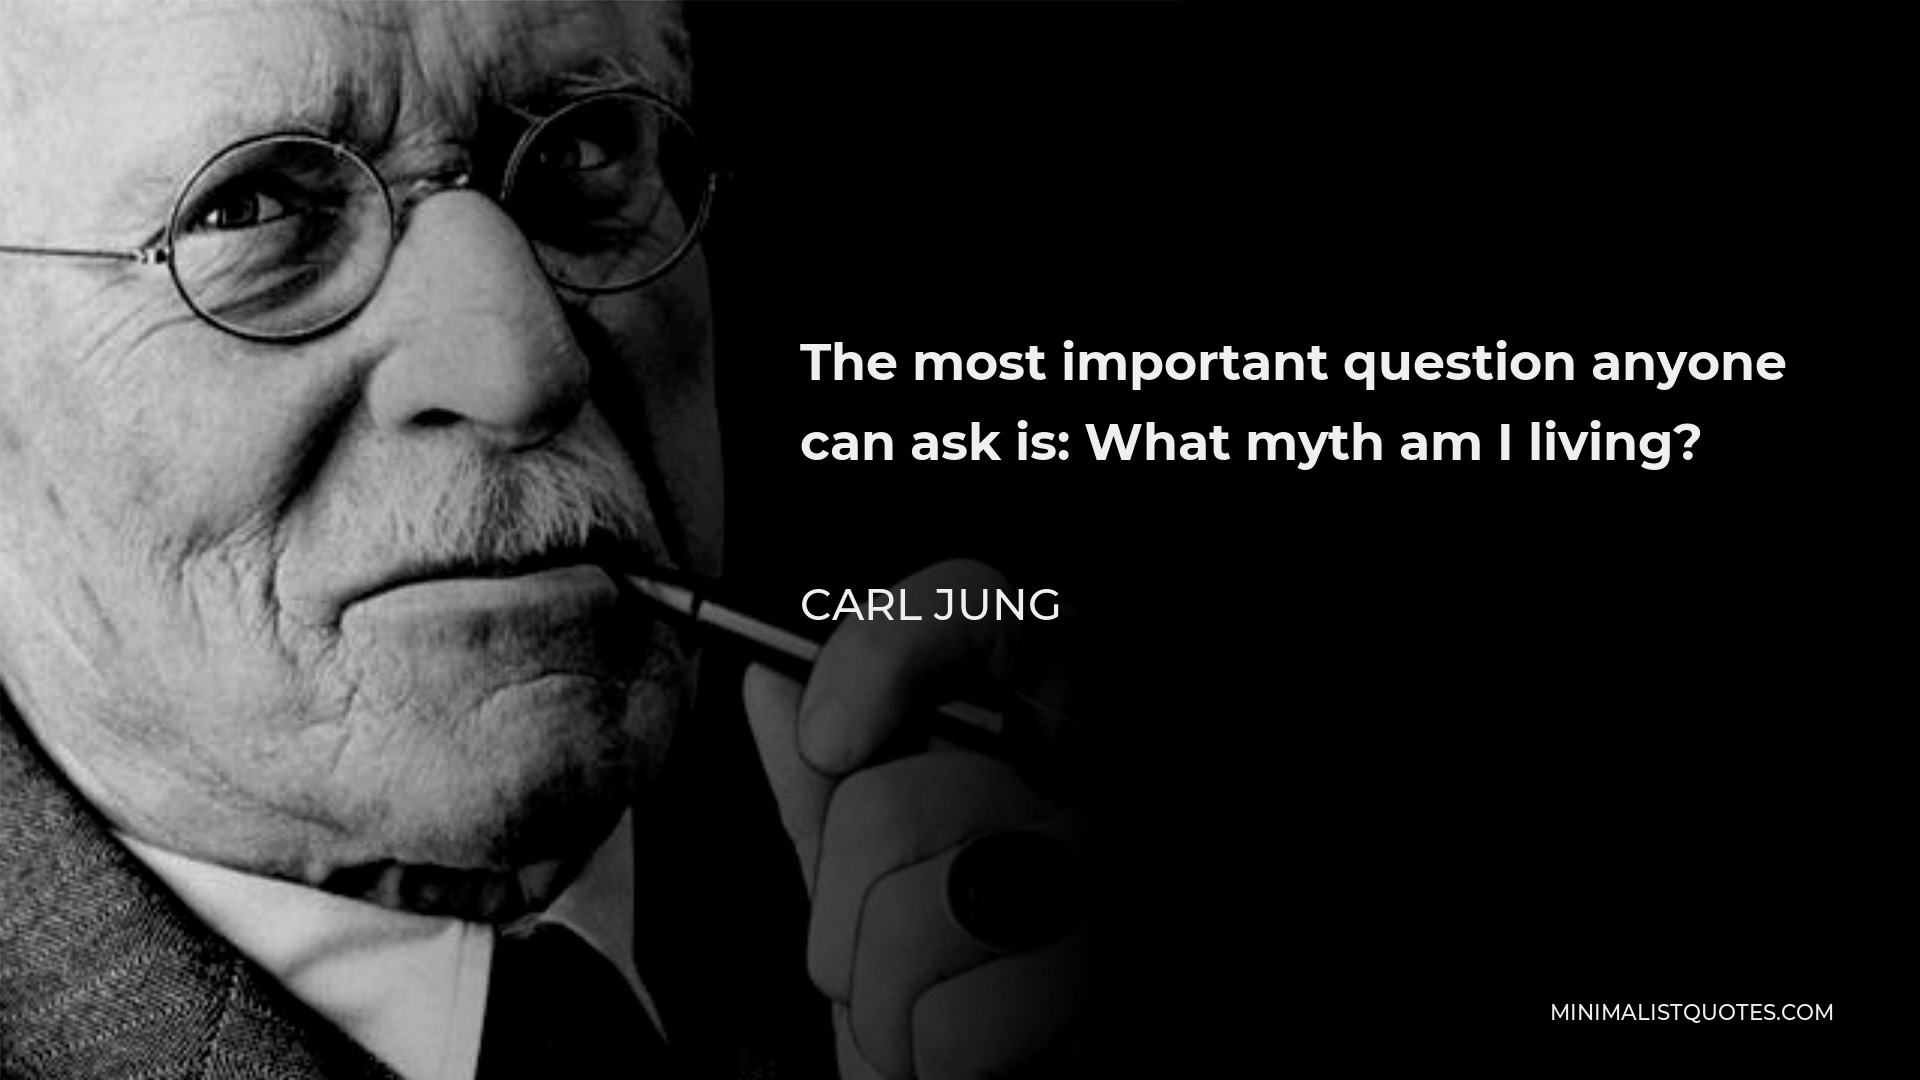 Carl Jung Quote - The most important question anyone can ask is: What myth am I living?